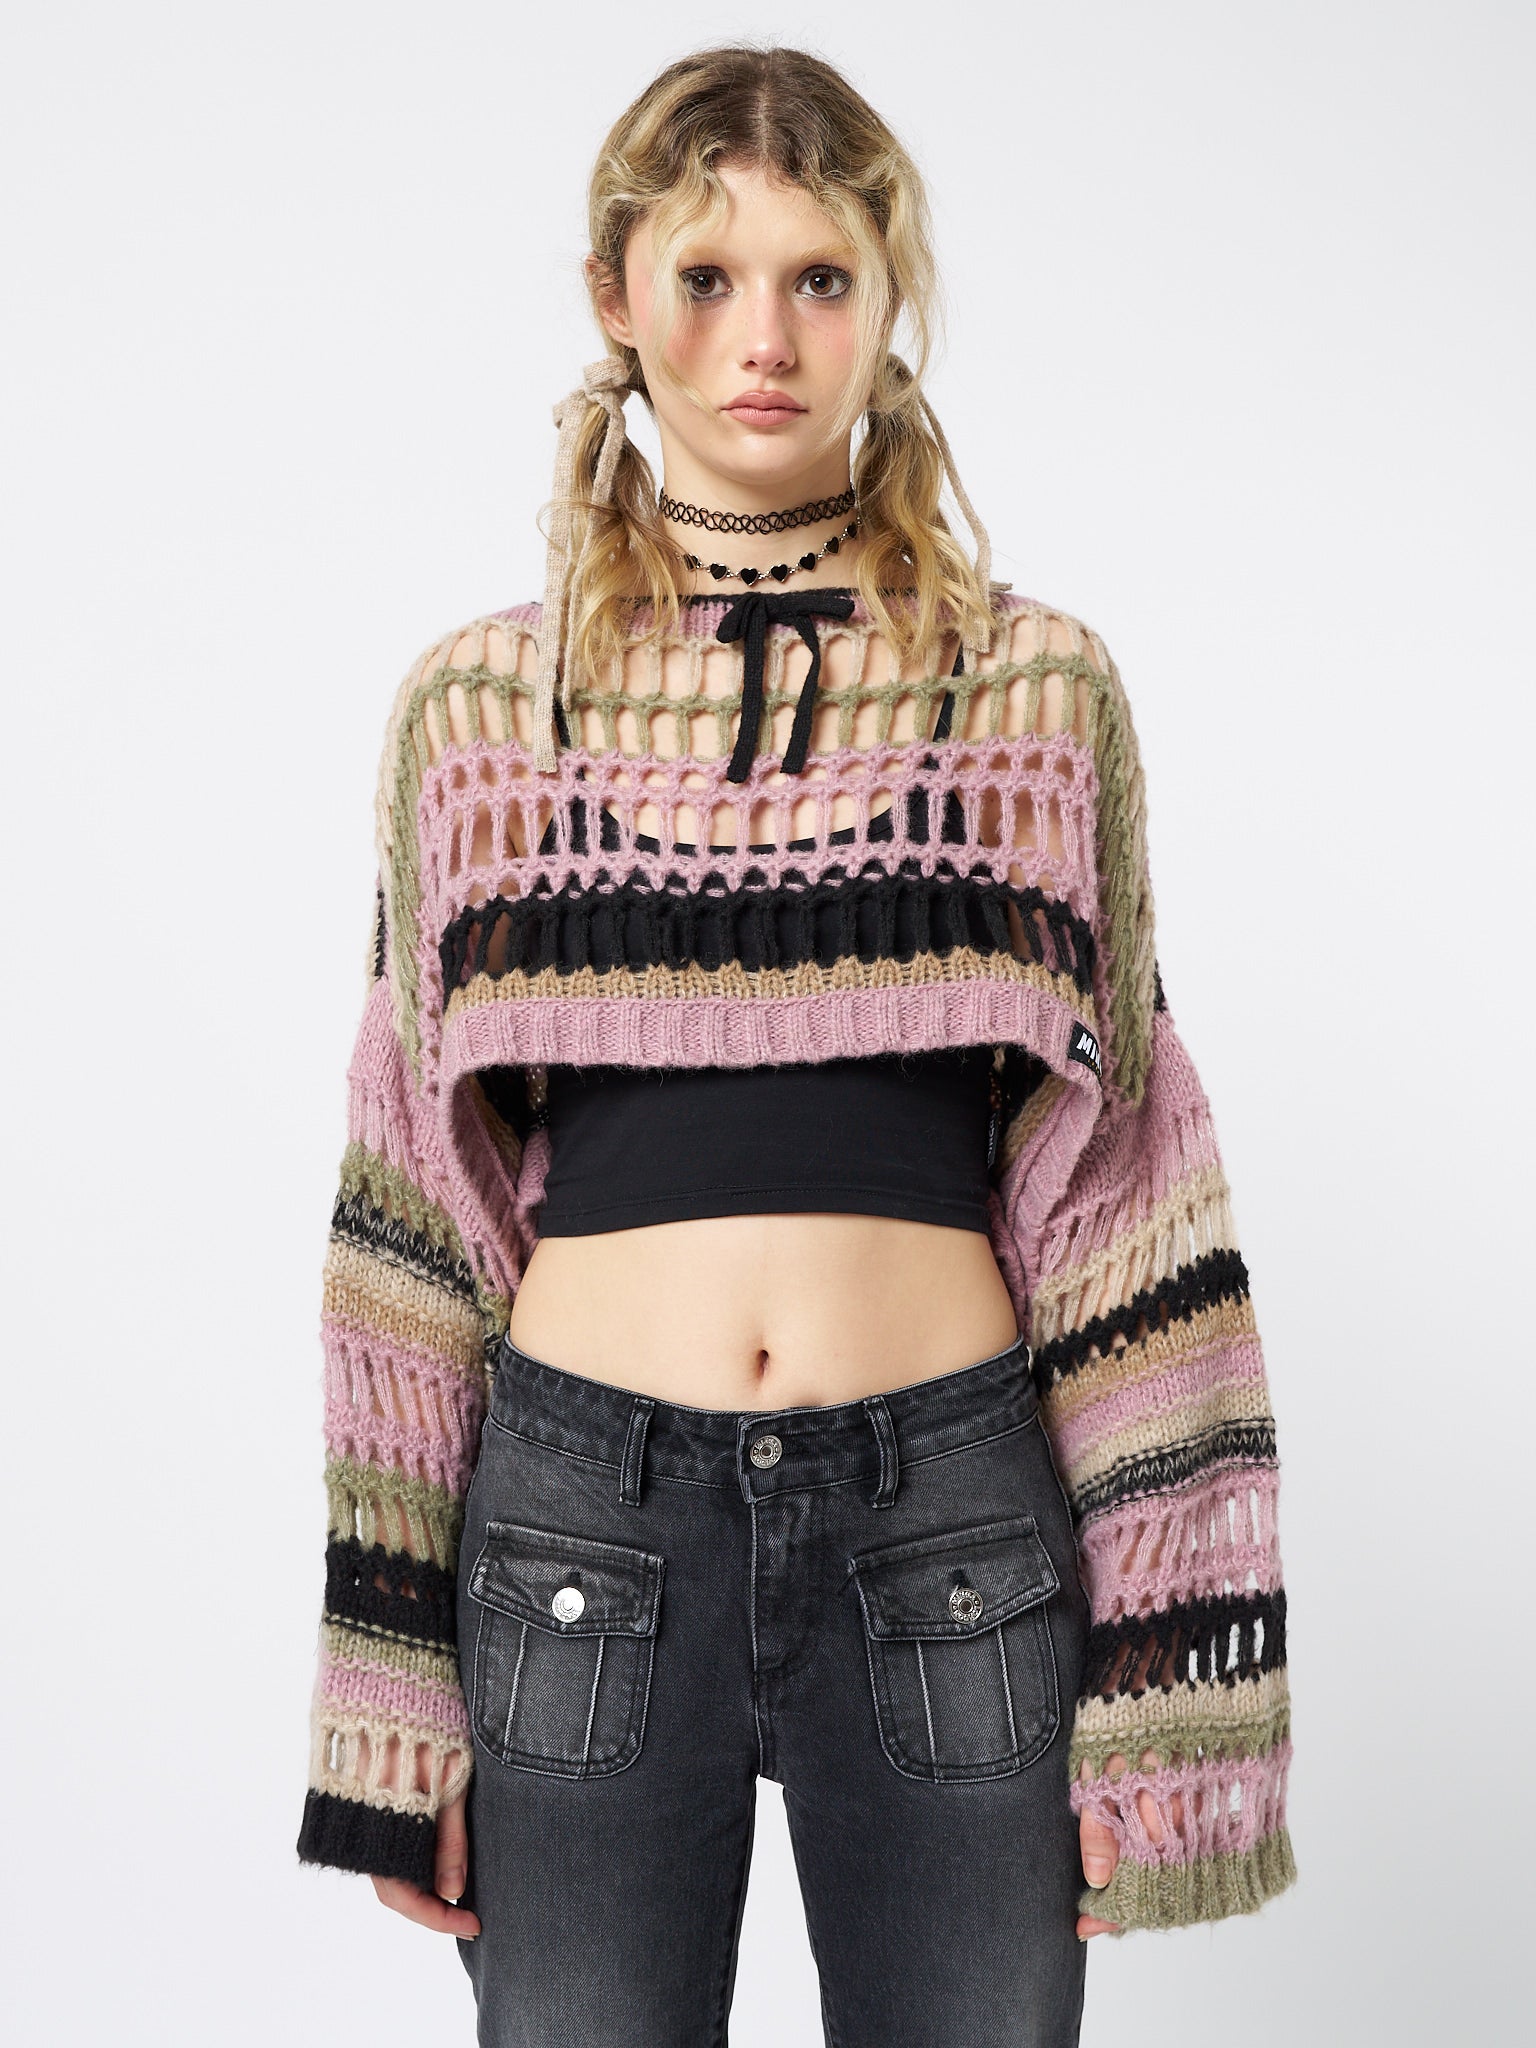 Stay cute and cozy in this pink cropped knit sweater with an edgy twist.